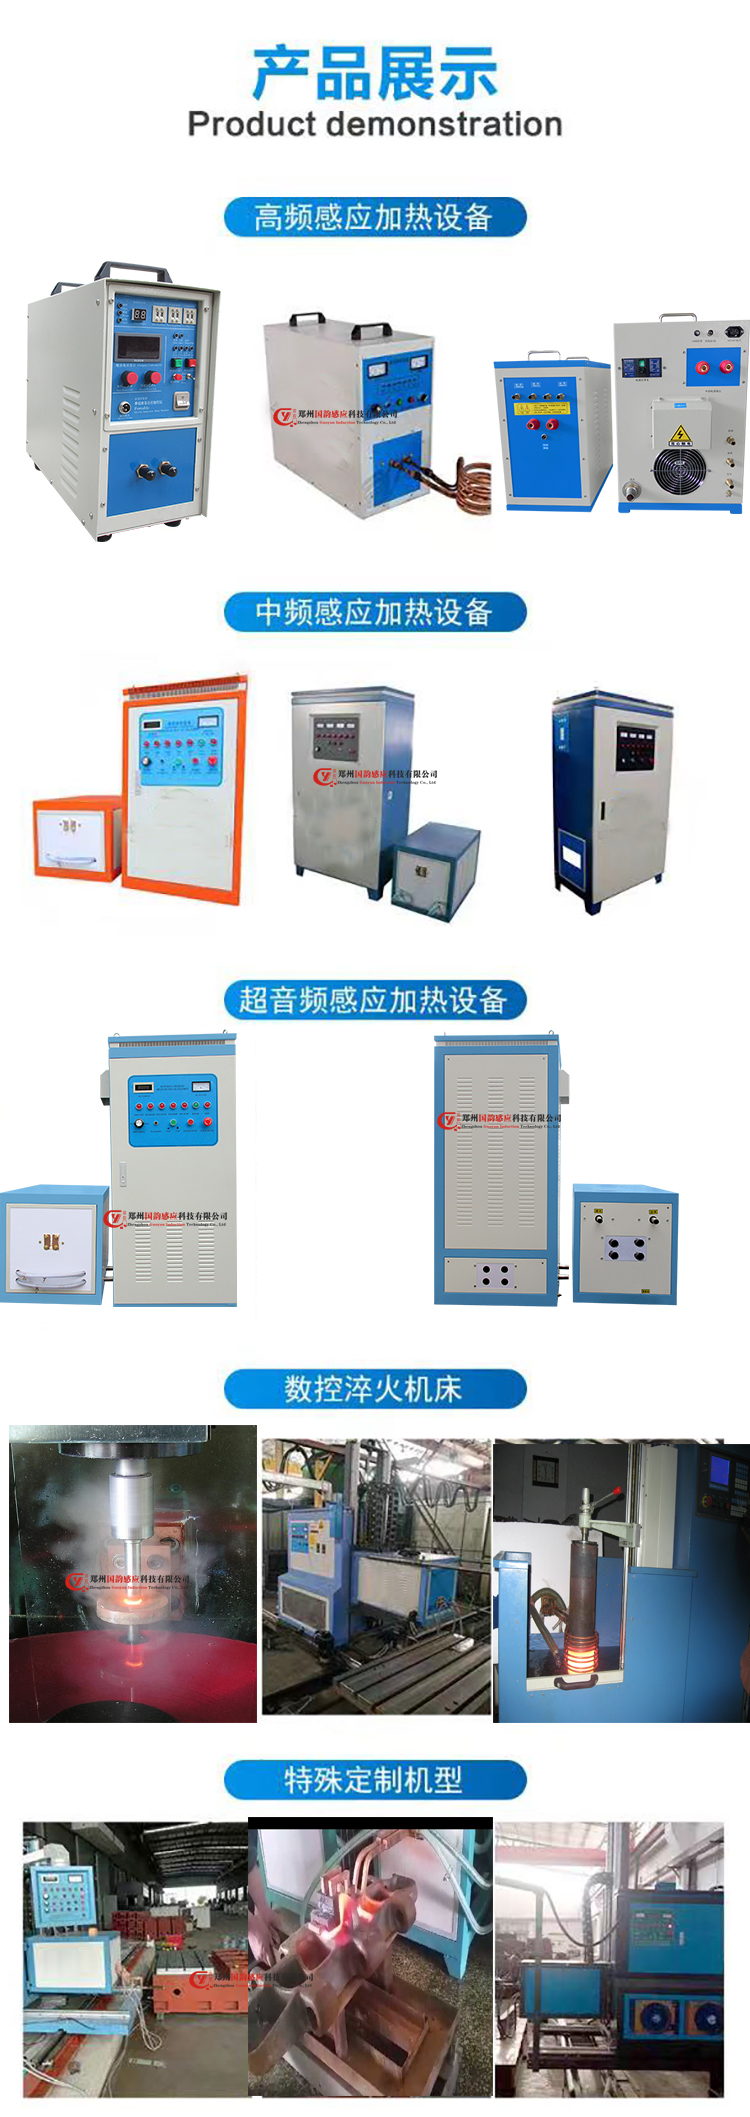 Alloy cutting head high-frequency induction heating equipment, sufficient inventory of automotive pin shaft ultrasonic quenching machines